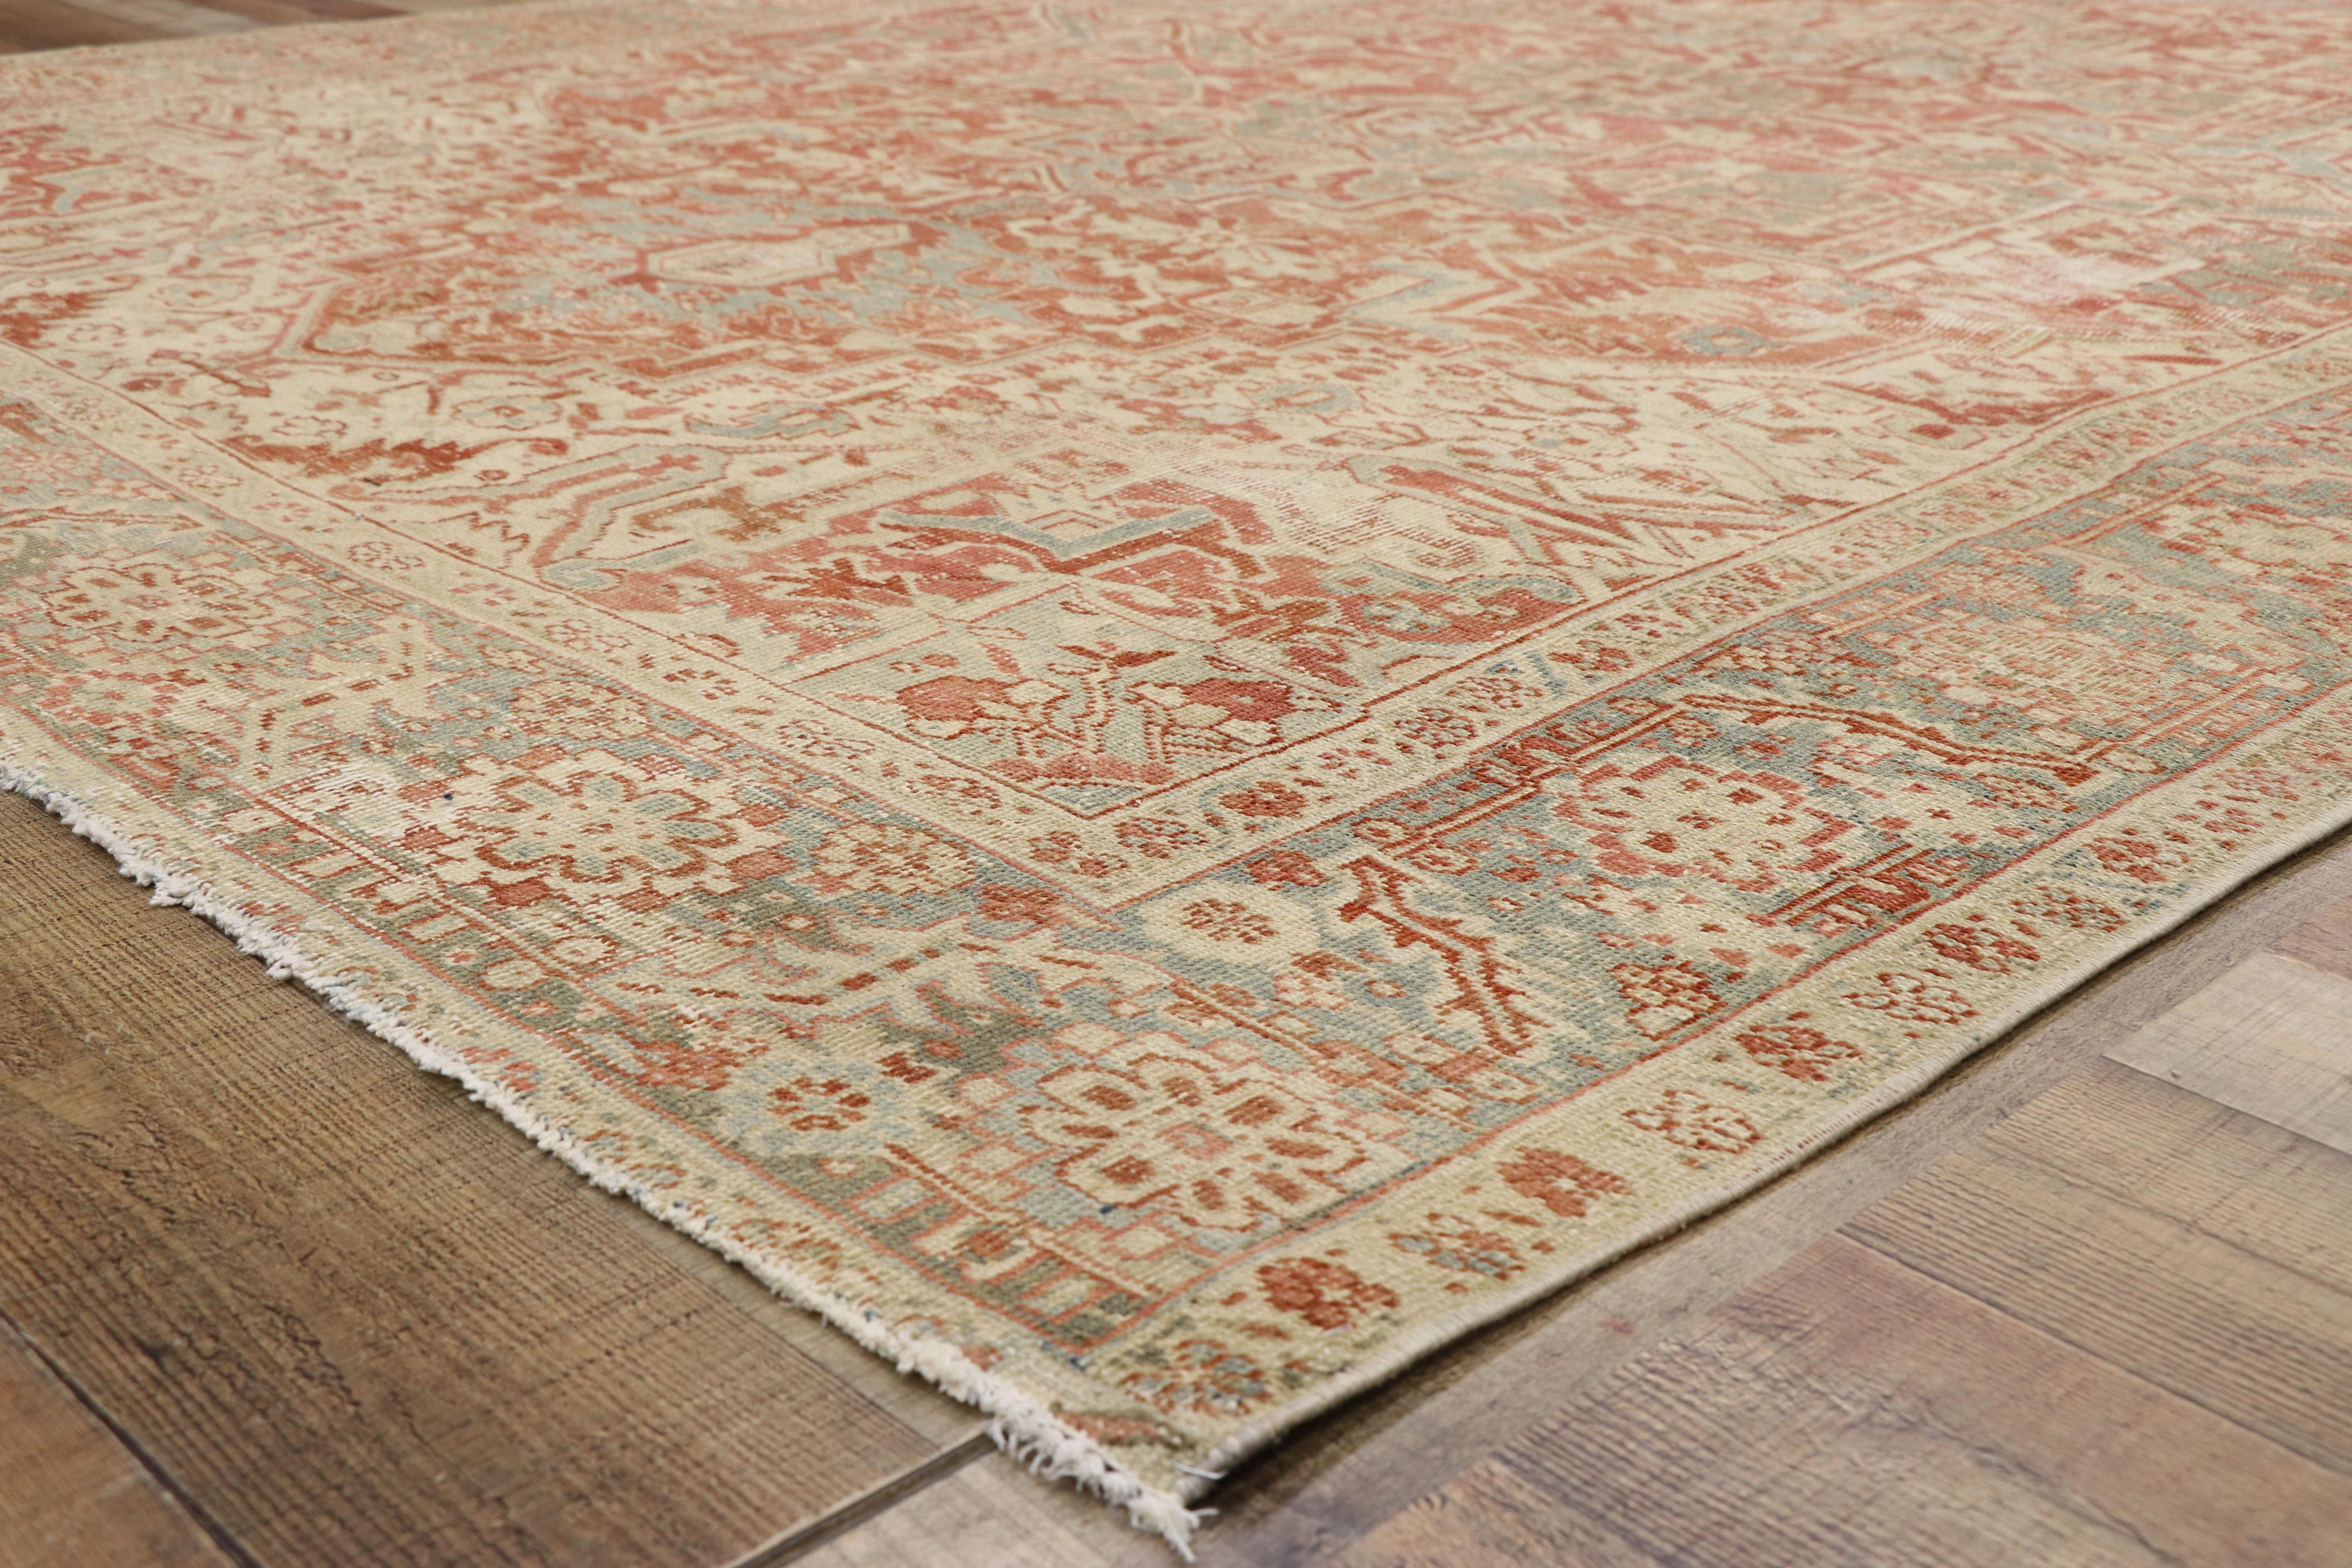 Distressed Antique Persian Heriz Design Rug with Rustic Bungalow Style In Distressed Condition For Sale In Dallas, TX